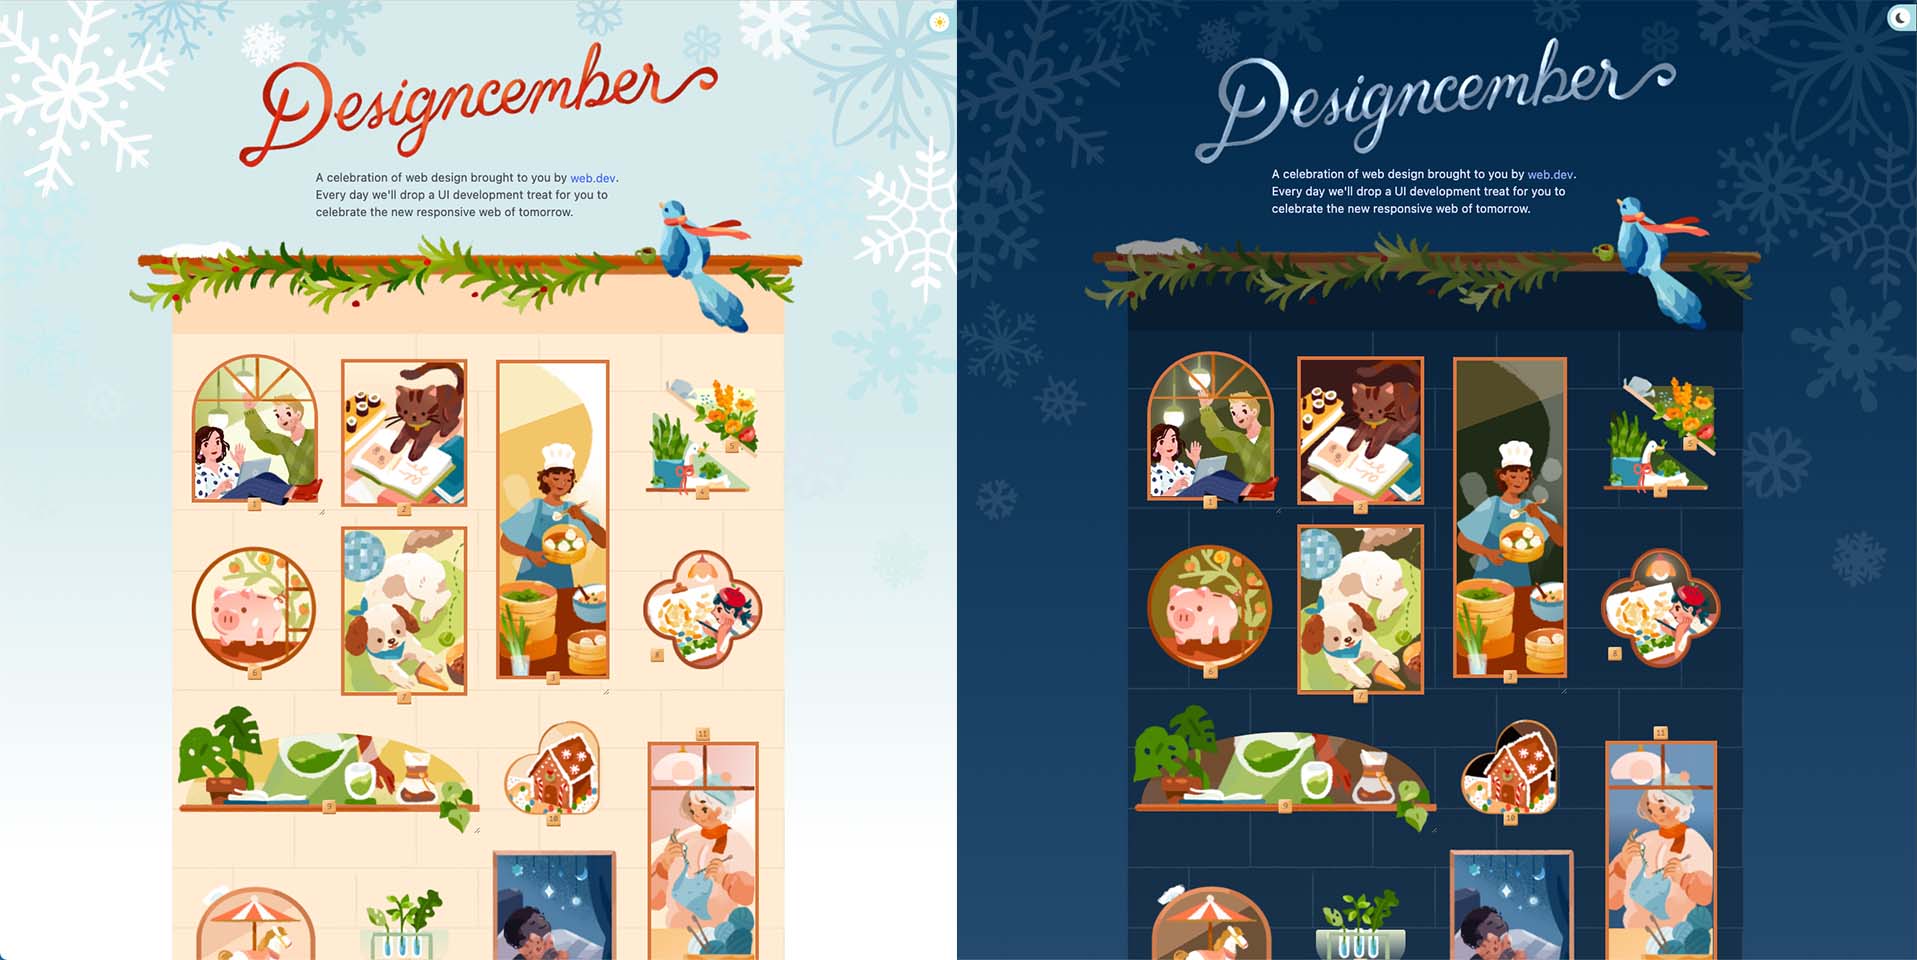 The light and dark mode versions of the Designcember site, side-by-side.